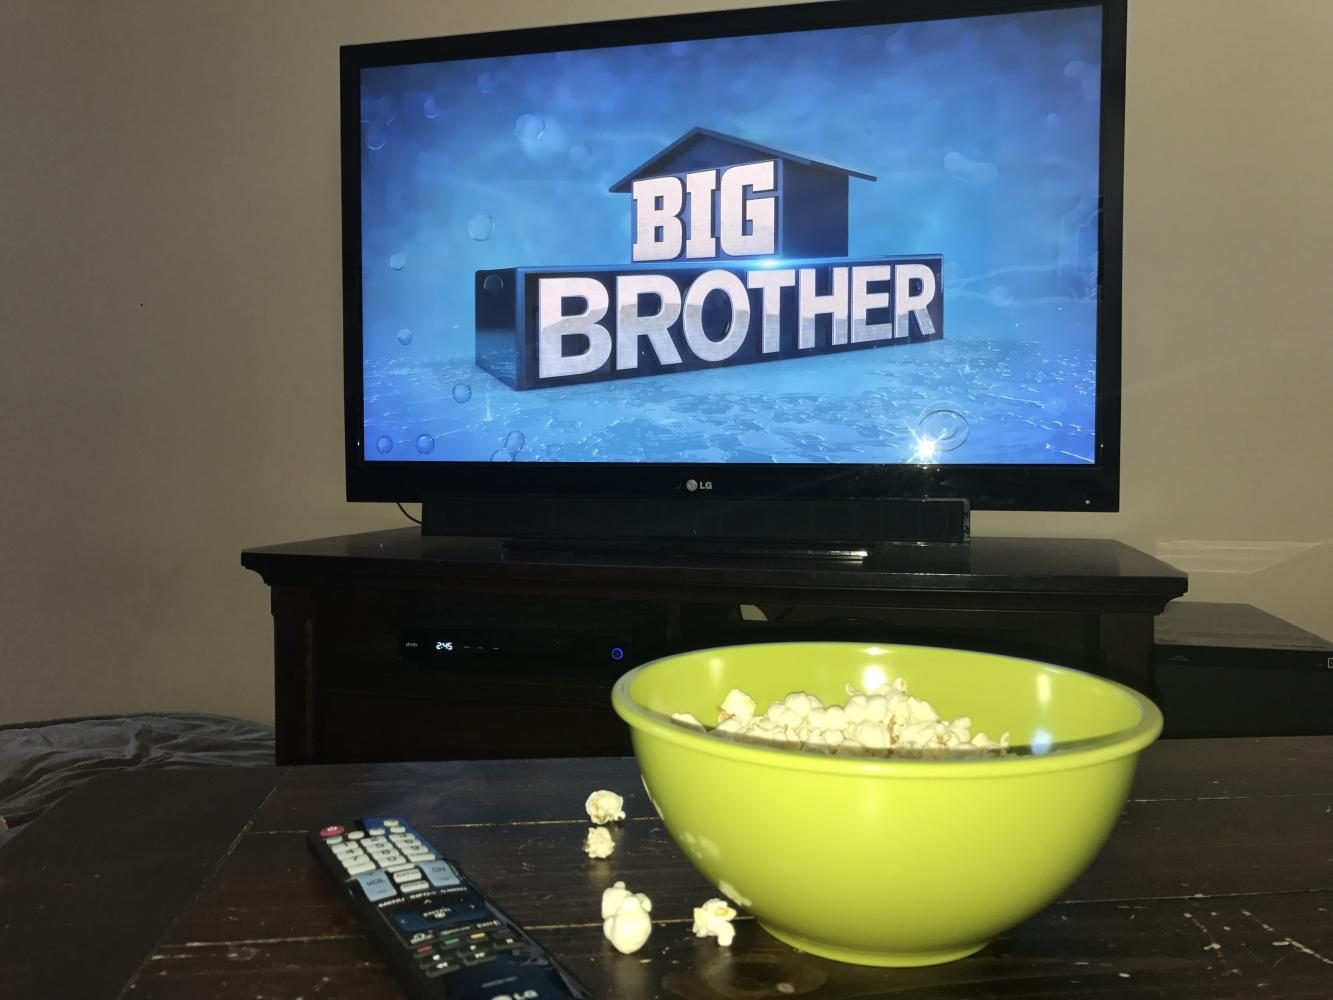 Big Brother: for better or for worse?